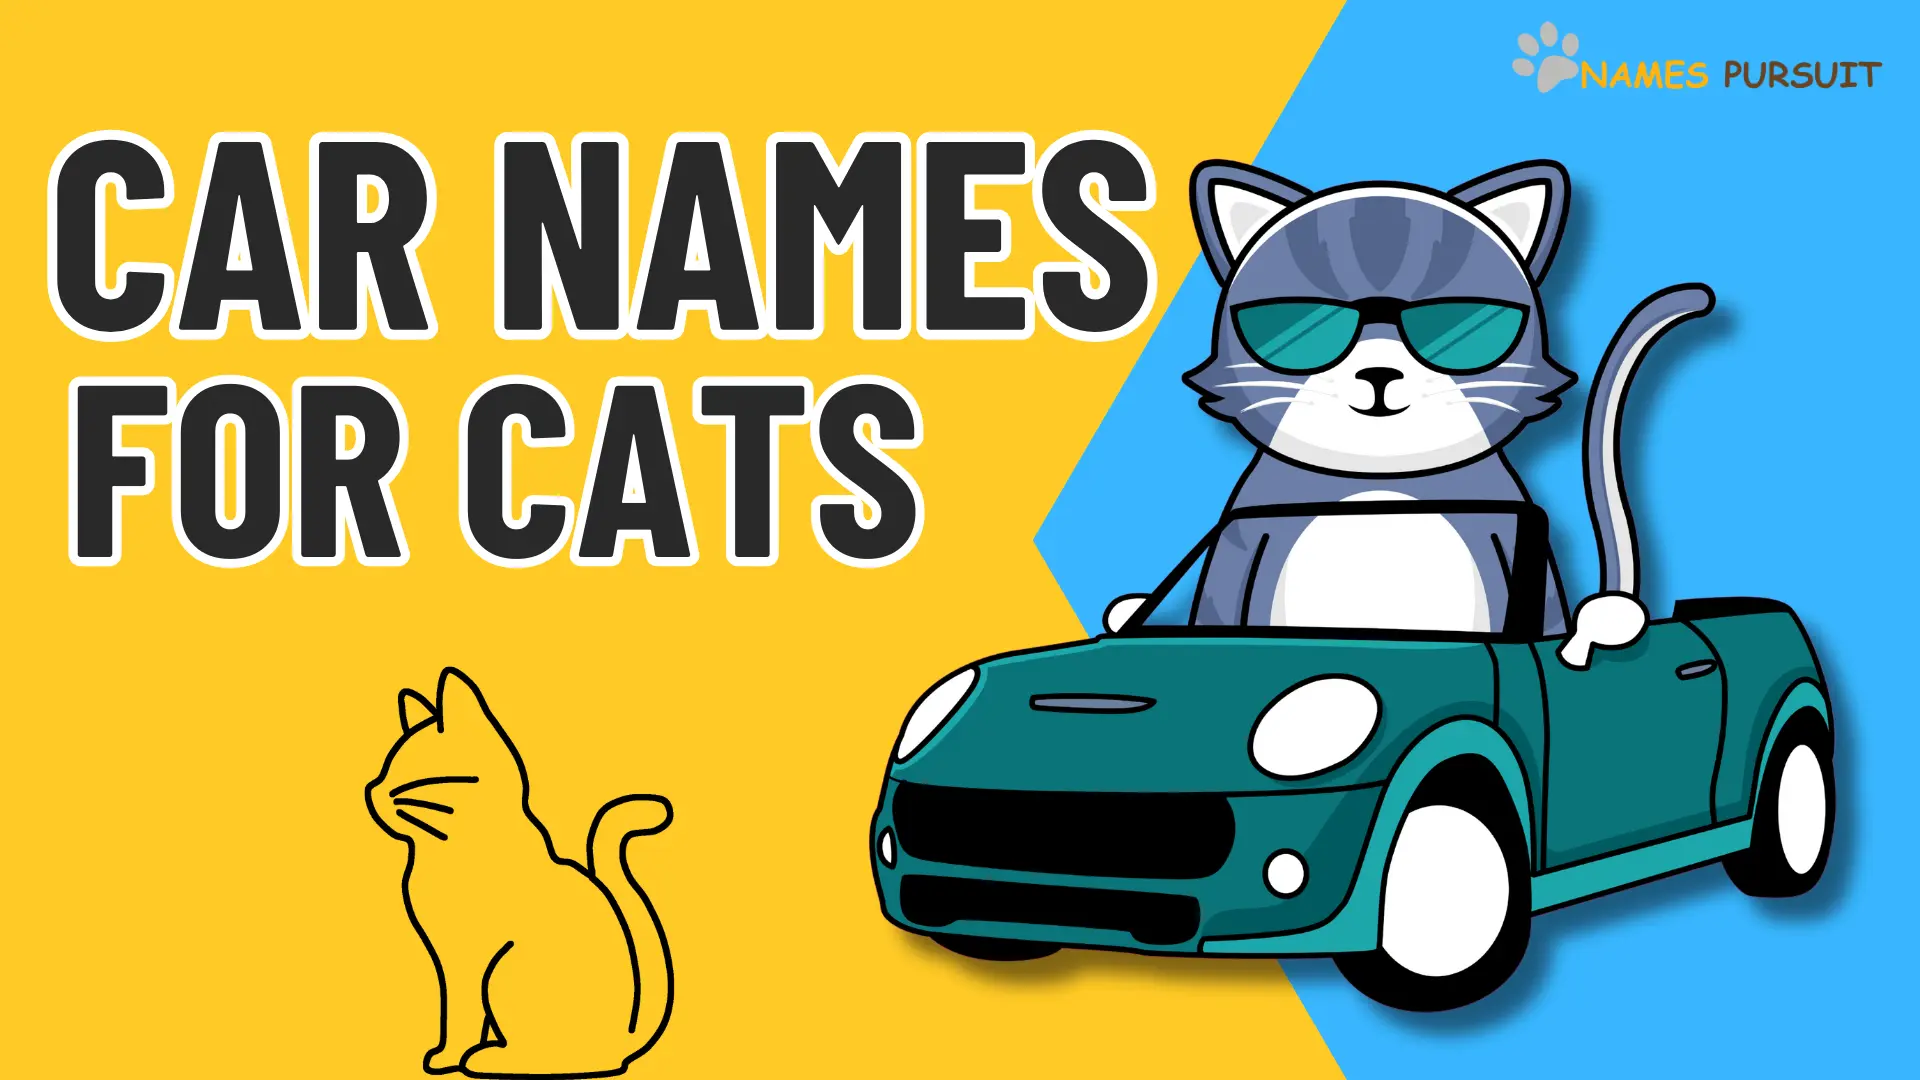 Car Names for Cats